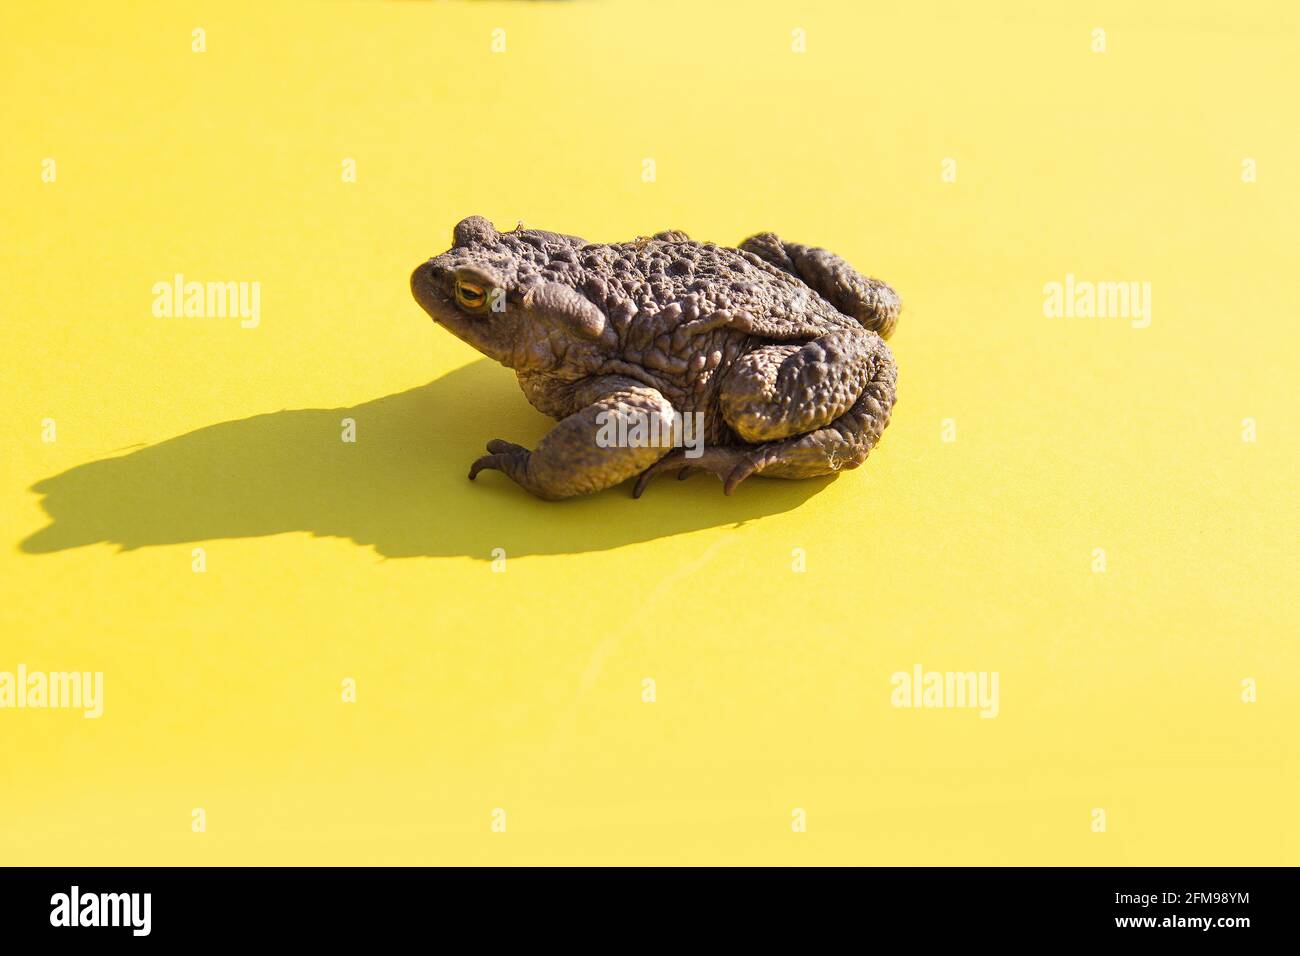 Large common water toad on a yellow background side view. A Stock Photo